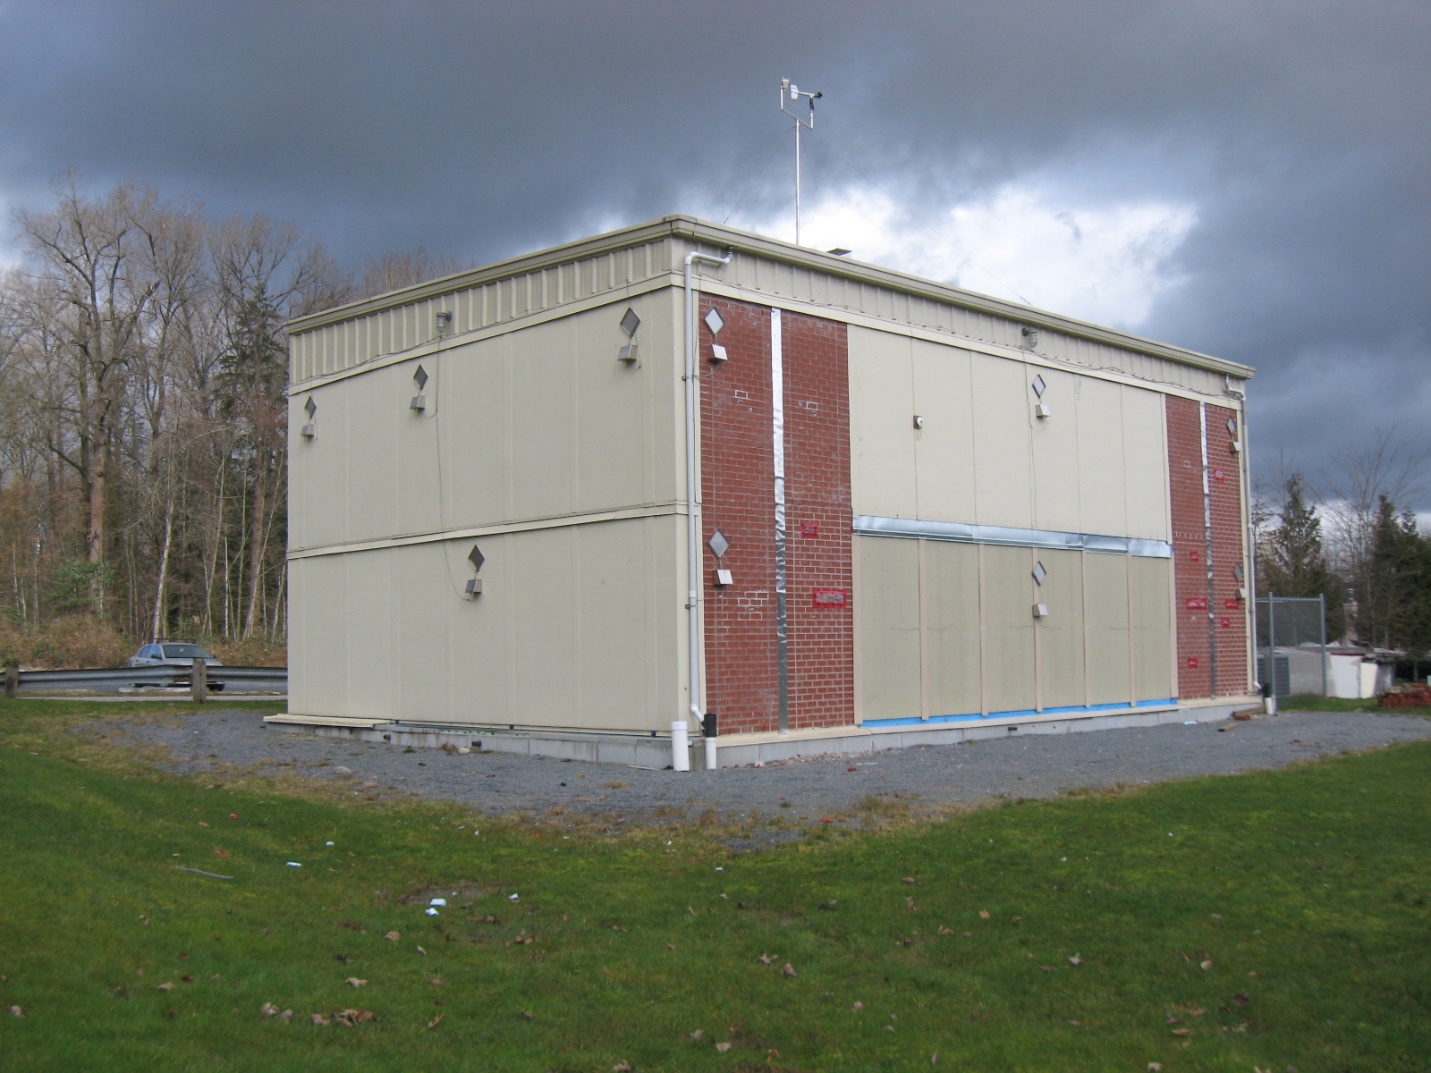 Front view and orientation of the Building Envelope Test Facility